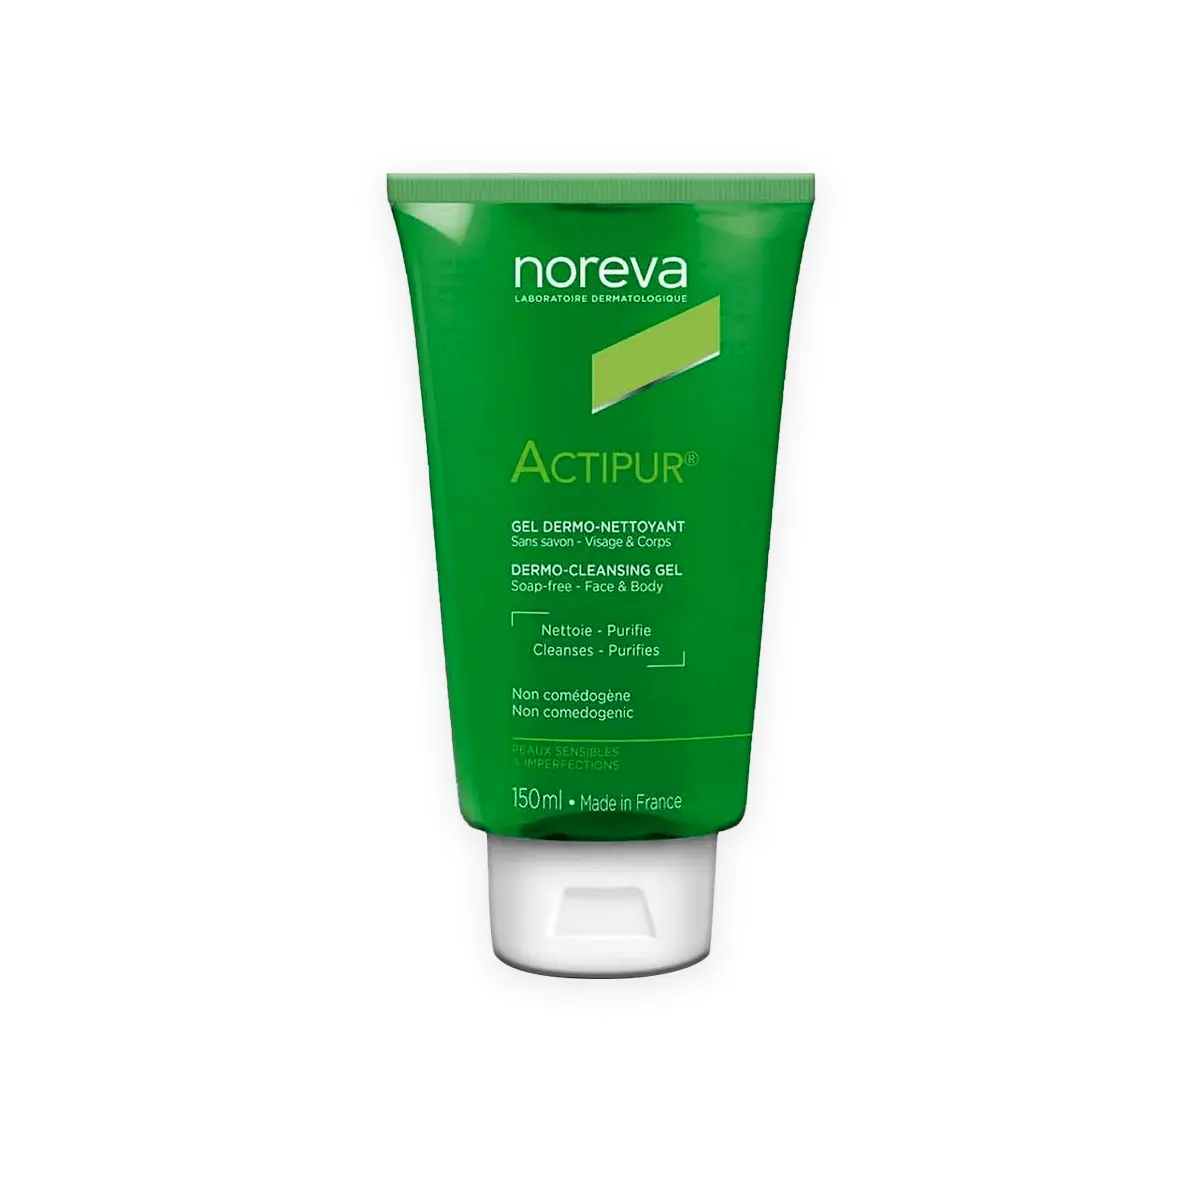 First product image of Noreva Actipur Dermo-Cleansing Gel 150ml